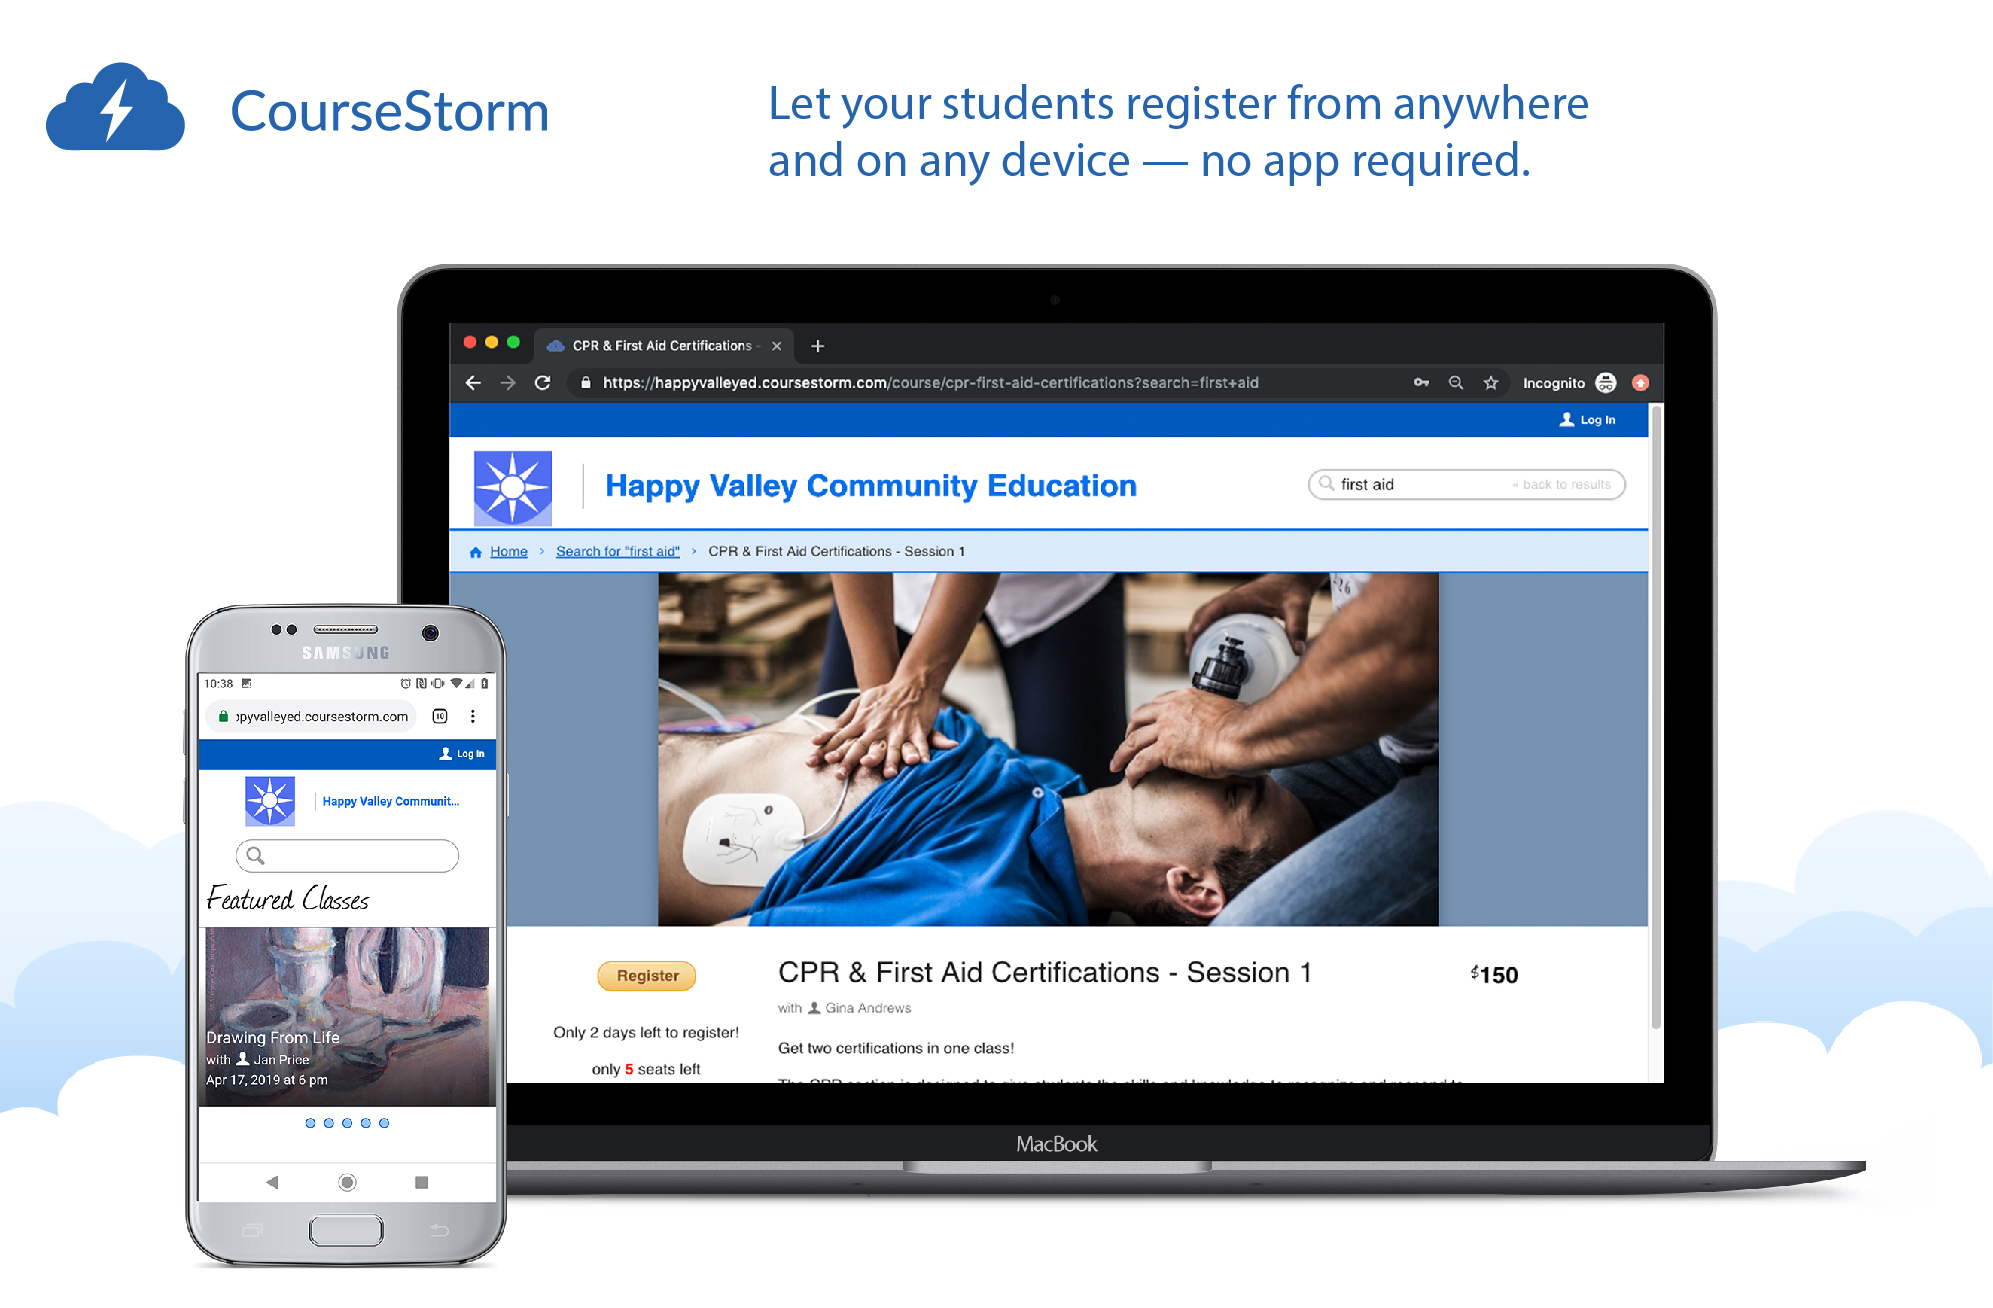 Let your students register from anywhere and on any device, no app required.